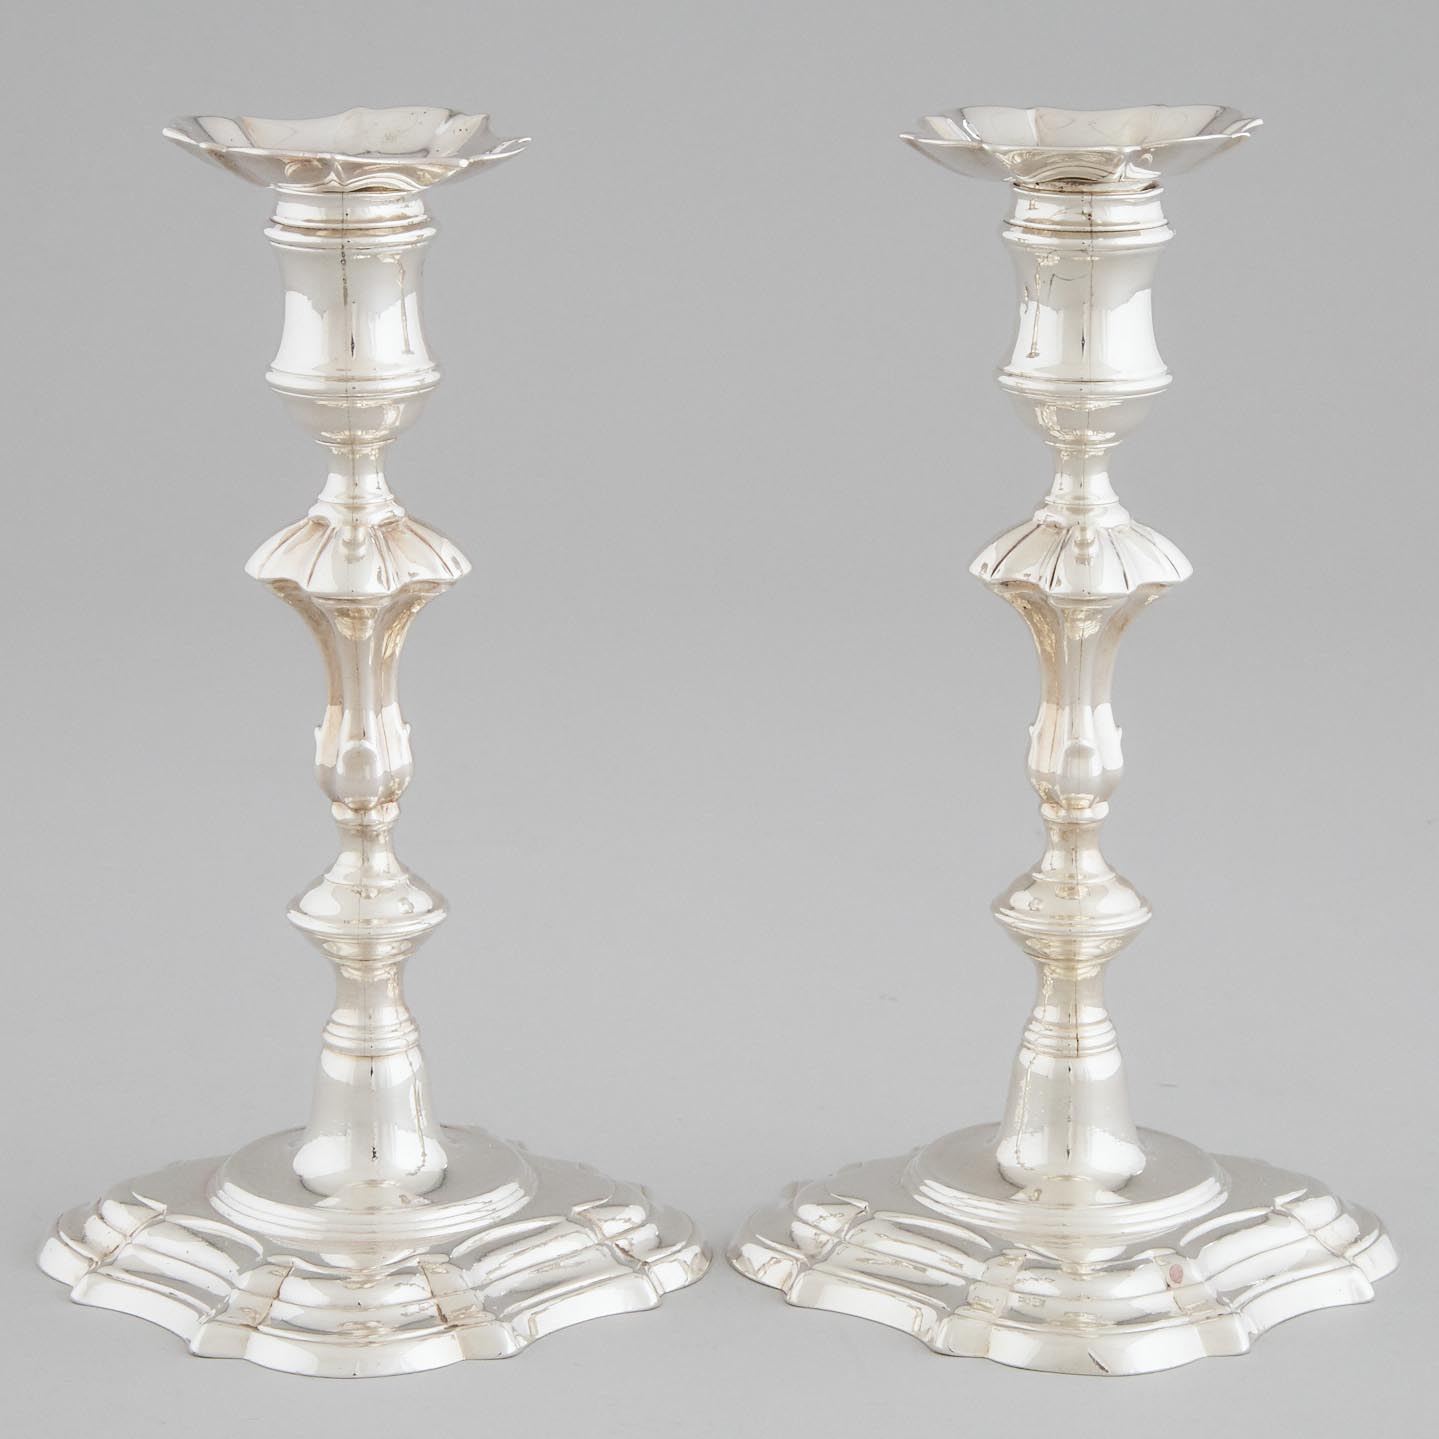 Pair of George III Silver Table Candlesticks, John Cafe, London, 1777